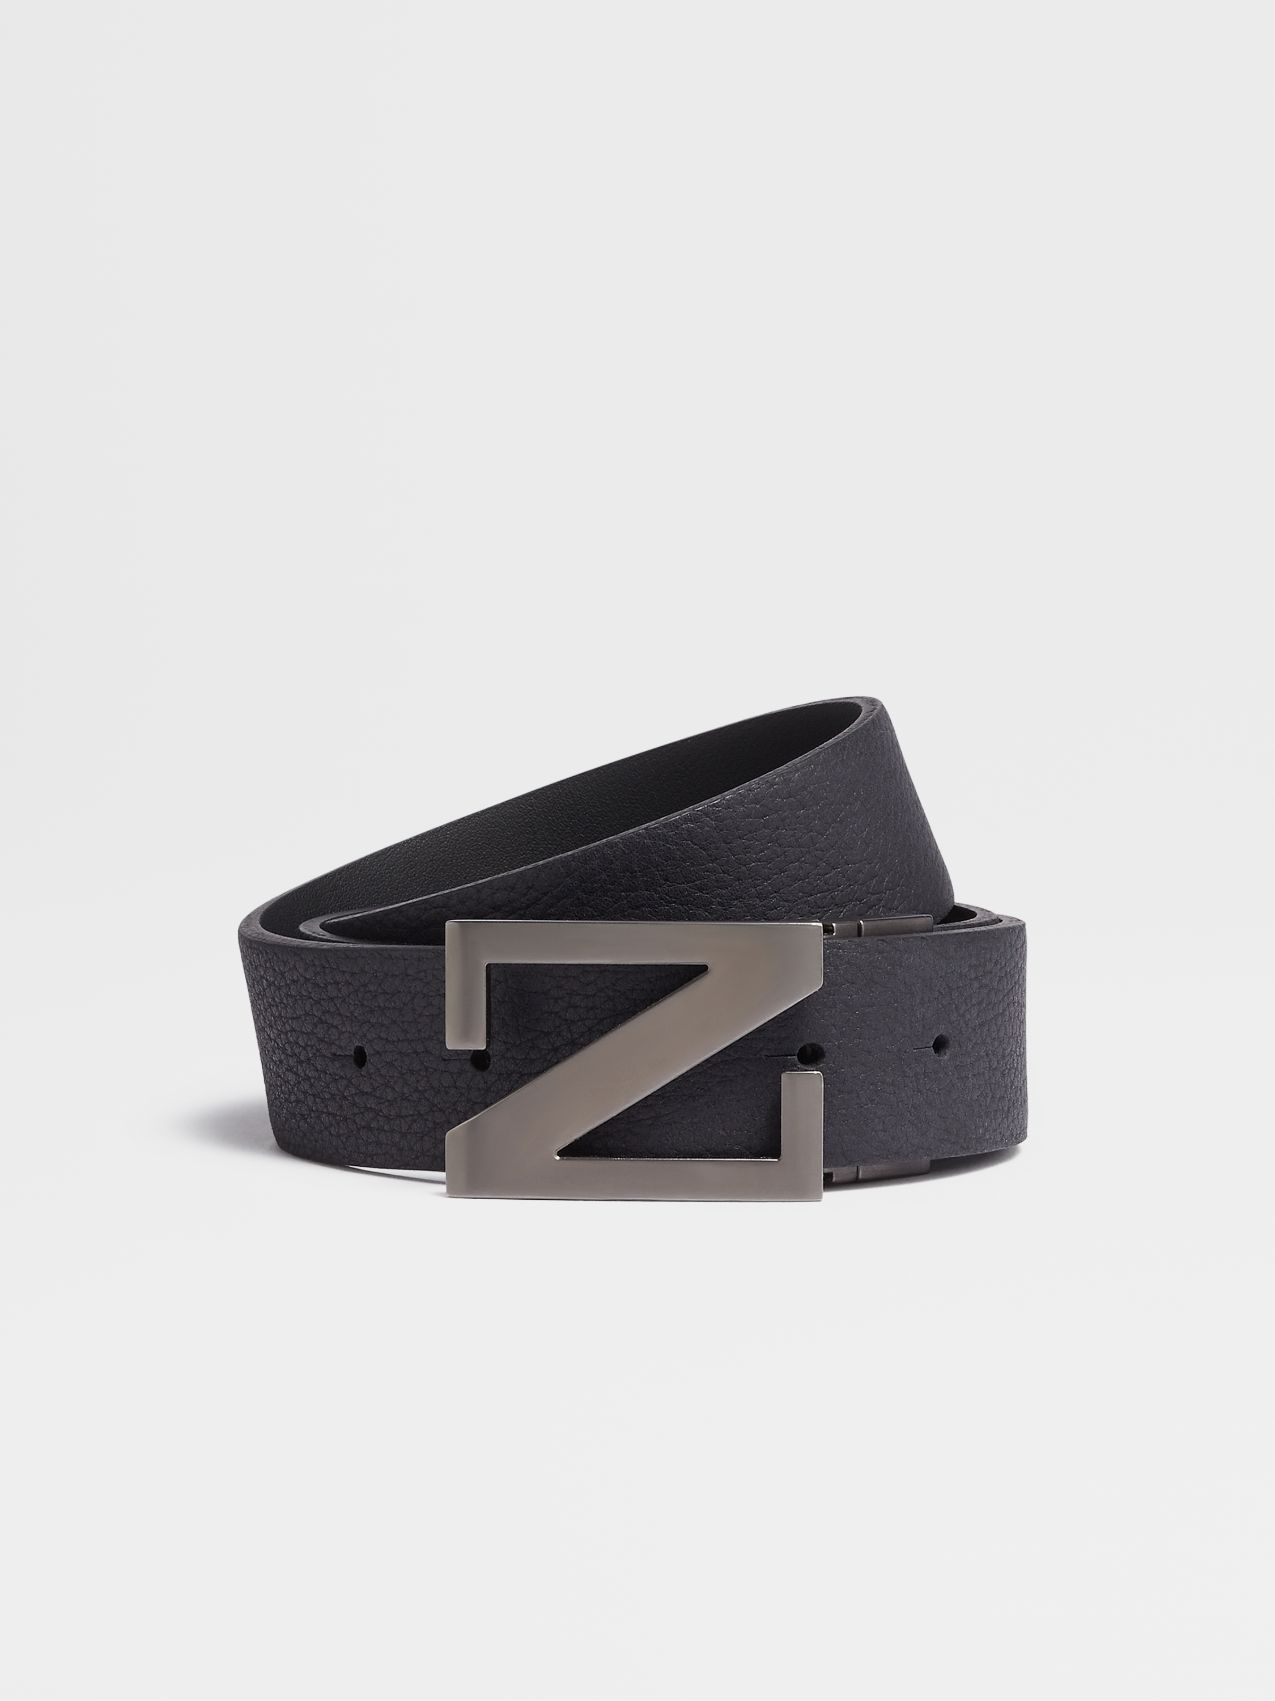 Navy Blue Grained Leather and Black Leather Reversible Belt